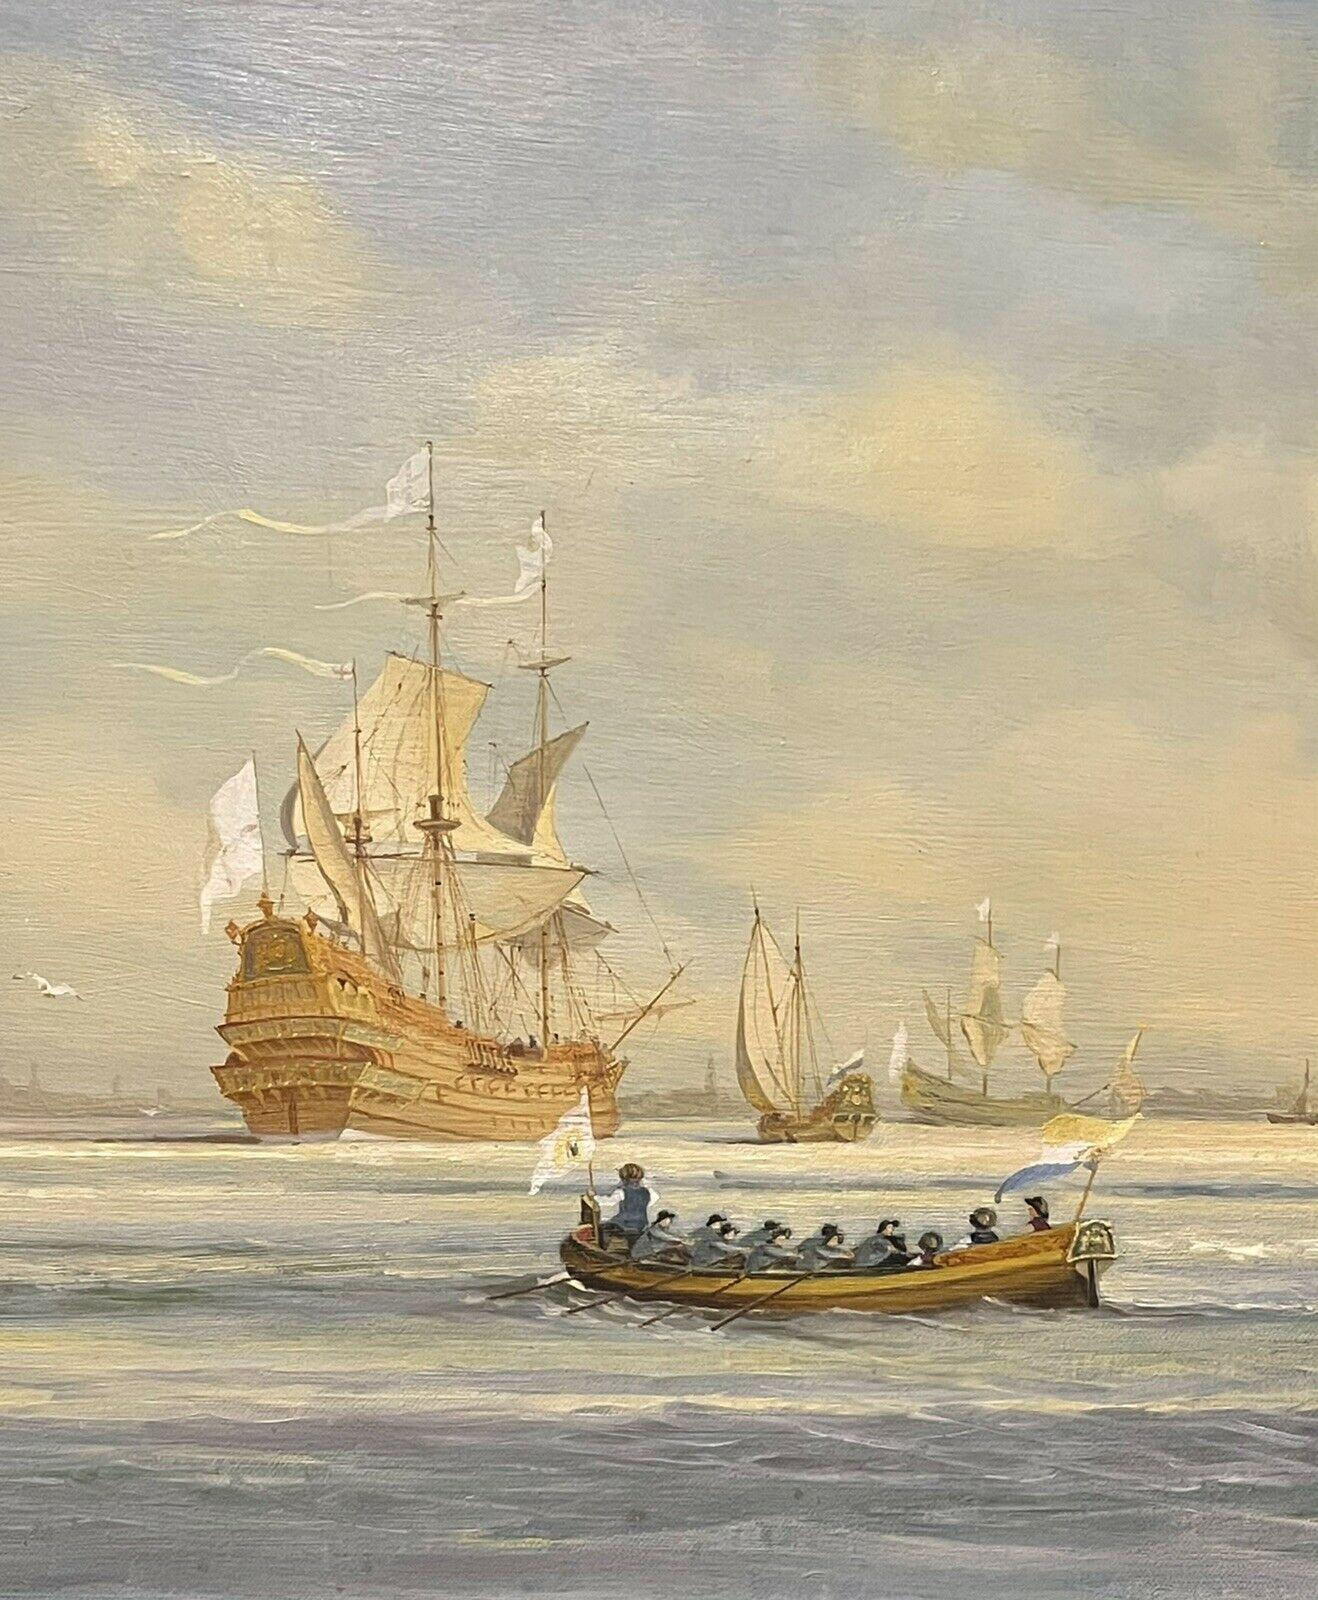 LARGE BRITISH HISTORICAL MARITIME OIL PAINTING - 17TH CENTURY SHIPS AT SEA - Victorian Painting by H. C. Arrowsmith